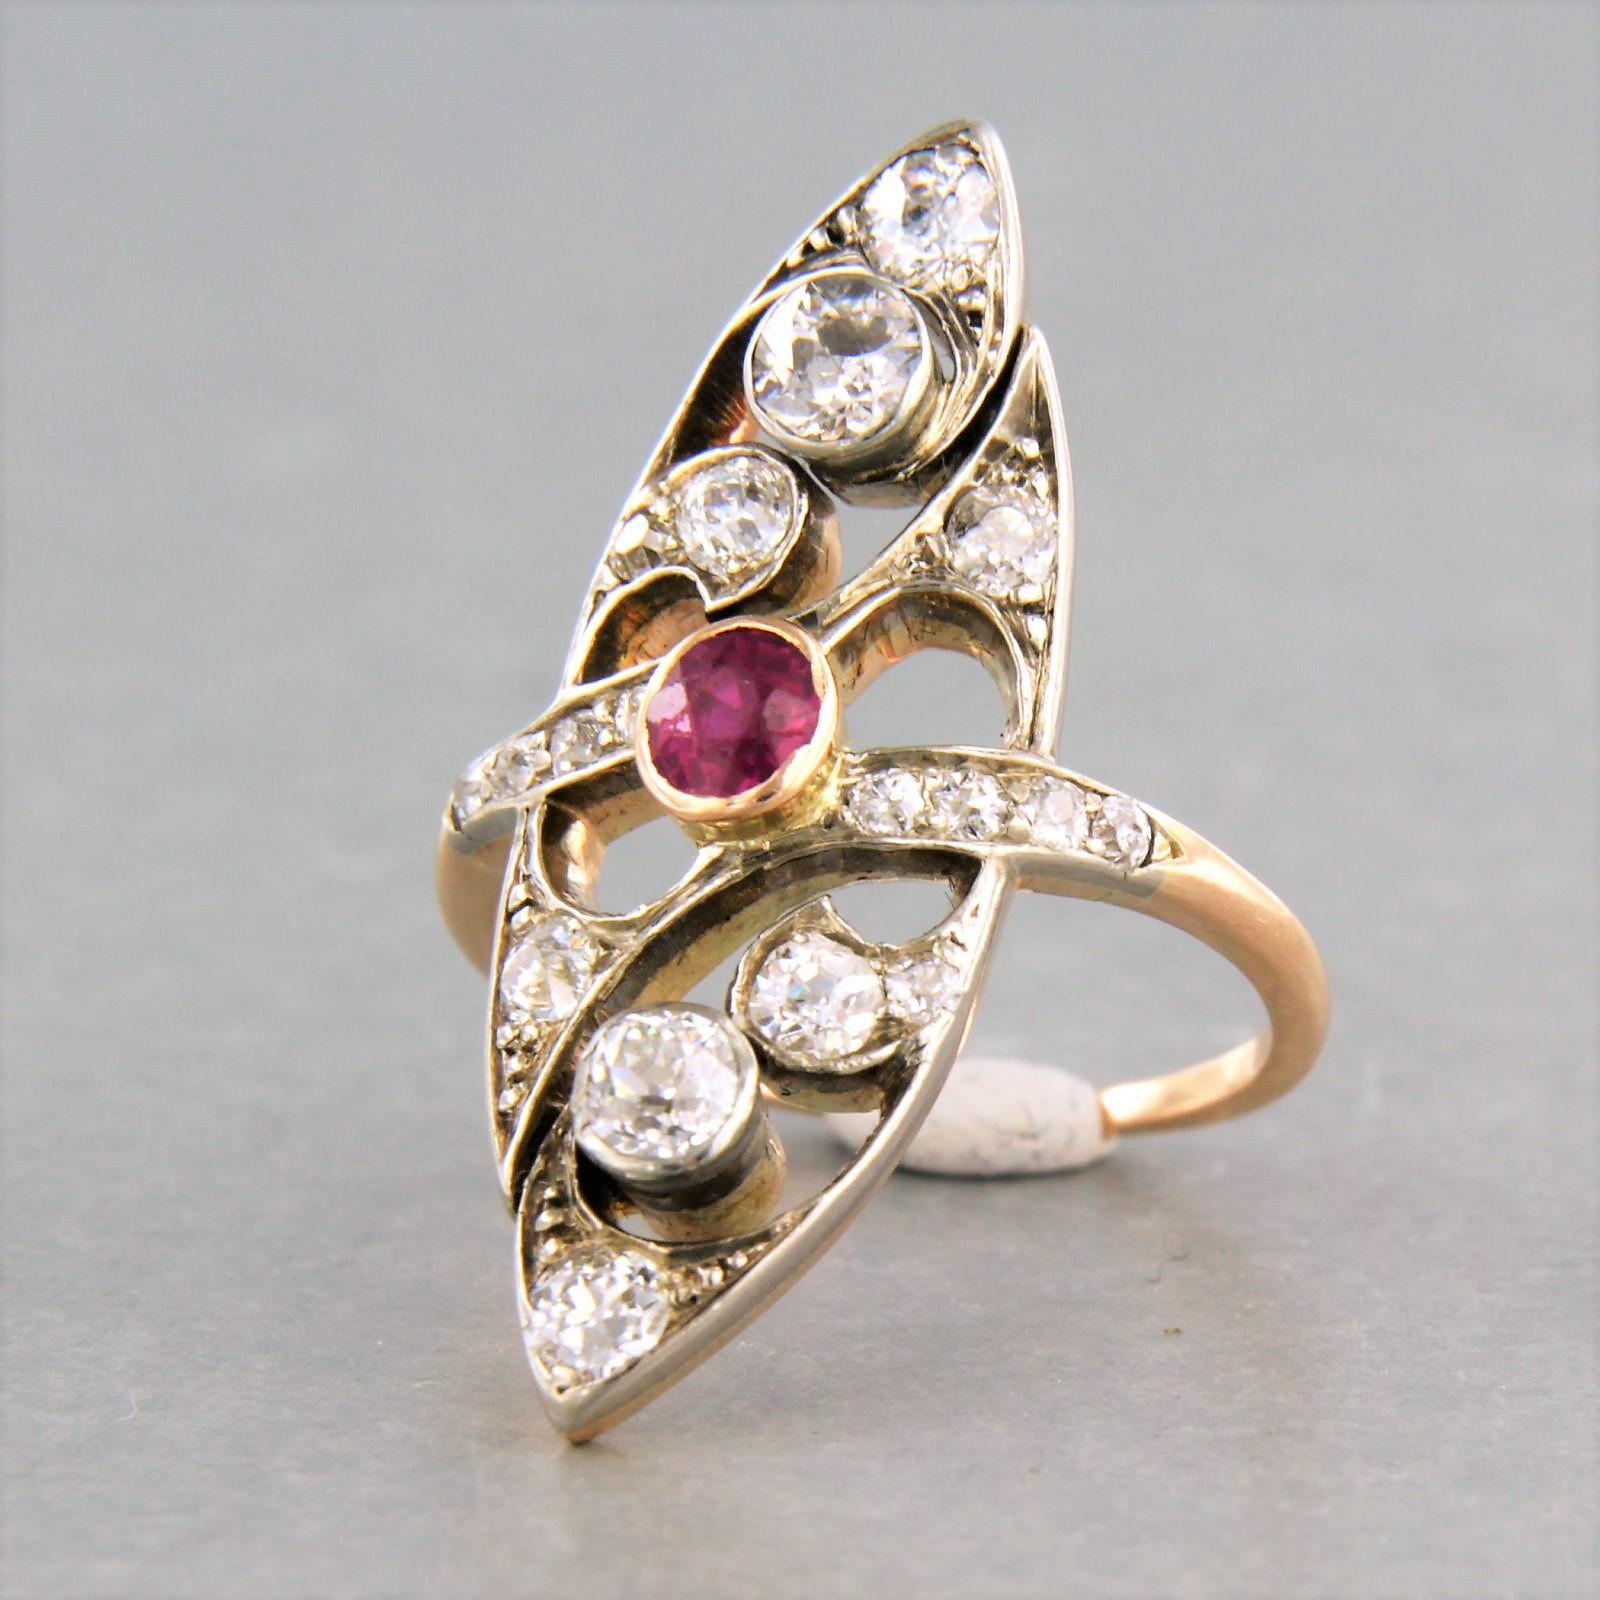 Old Mine Cut Ring with ruby and diamonds 14k yellow gold and silver For Sale